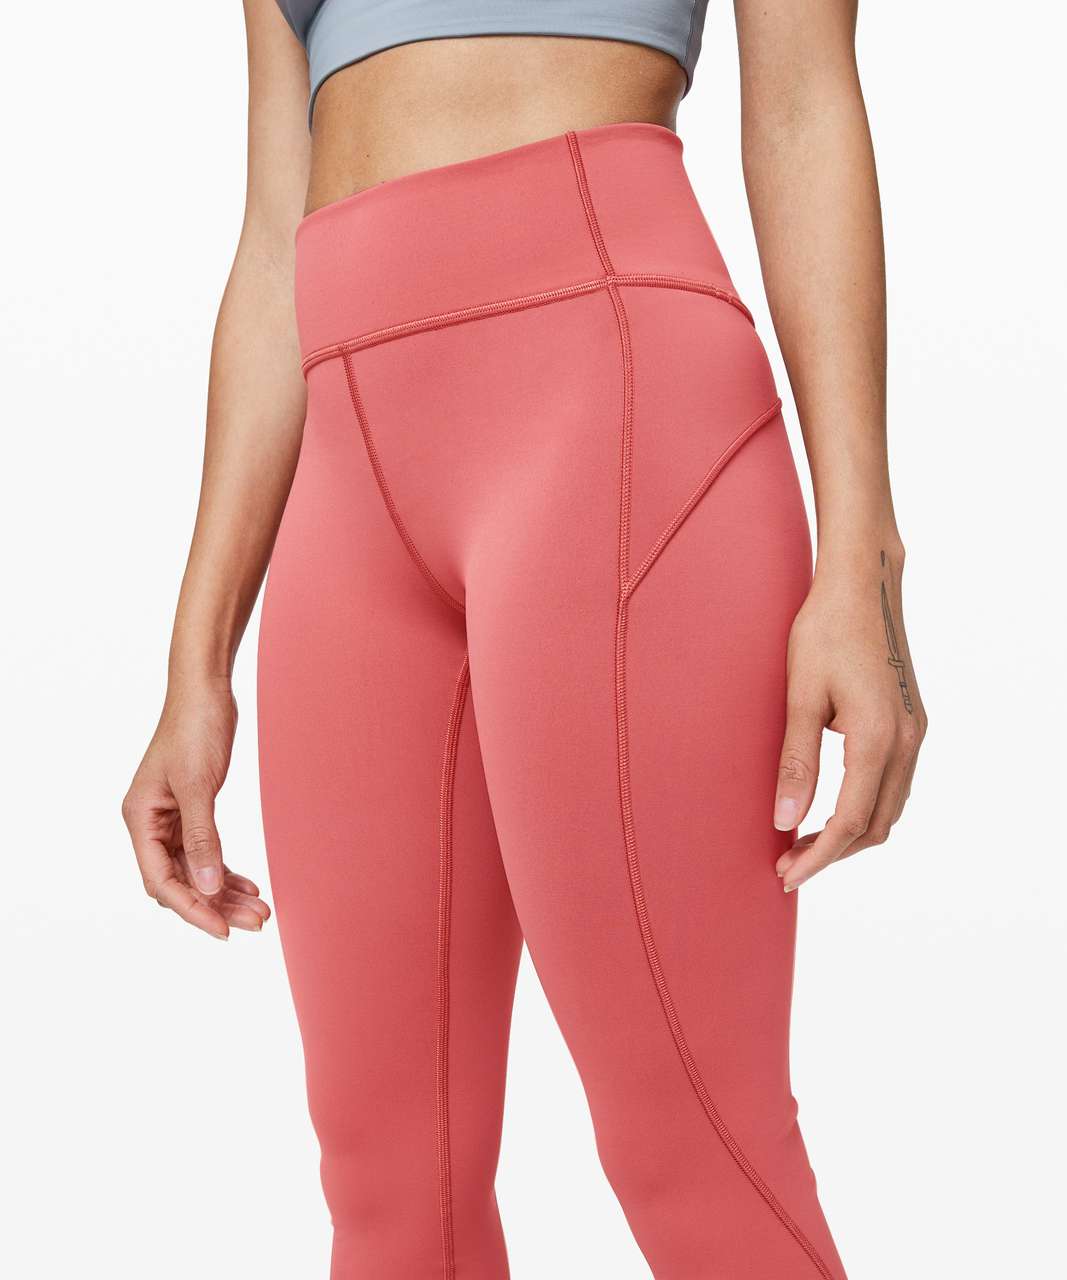 Lululemon In Movement Tight 25" *Everlux - Rustic Coral